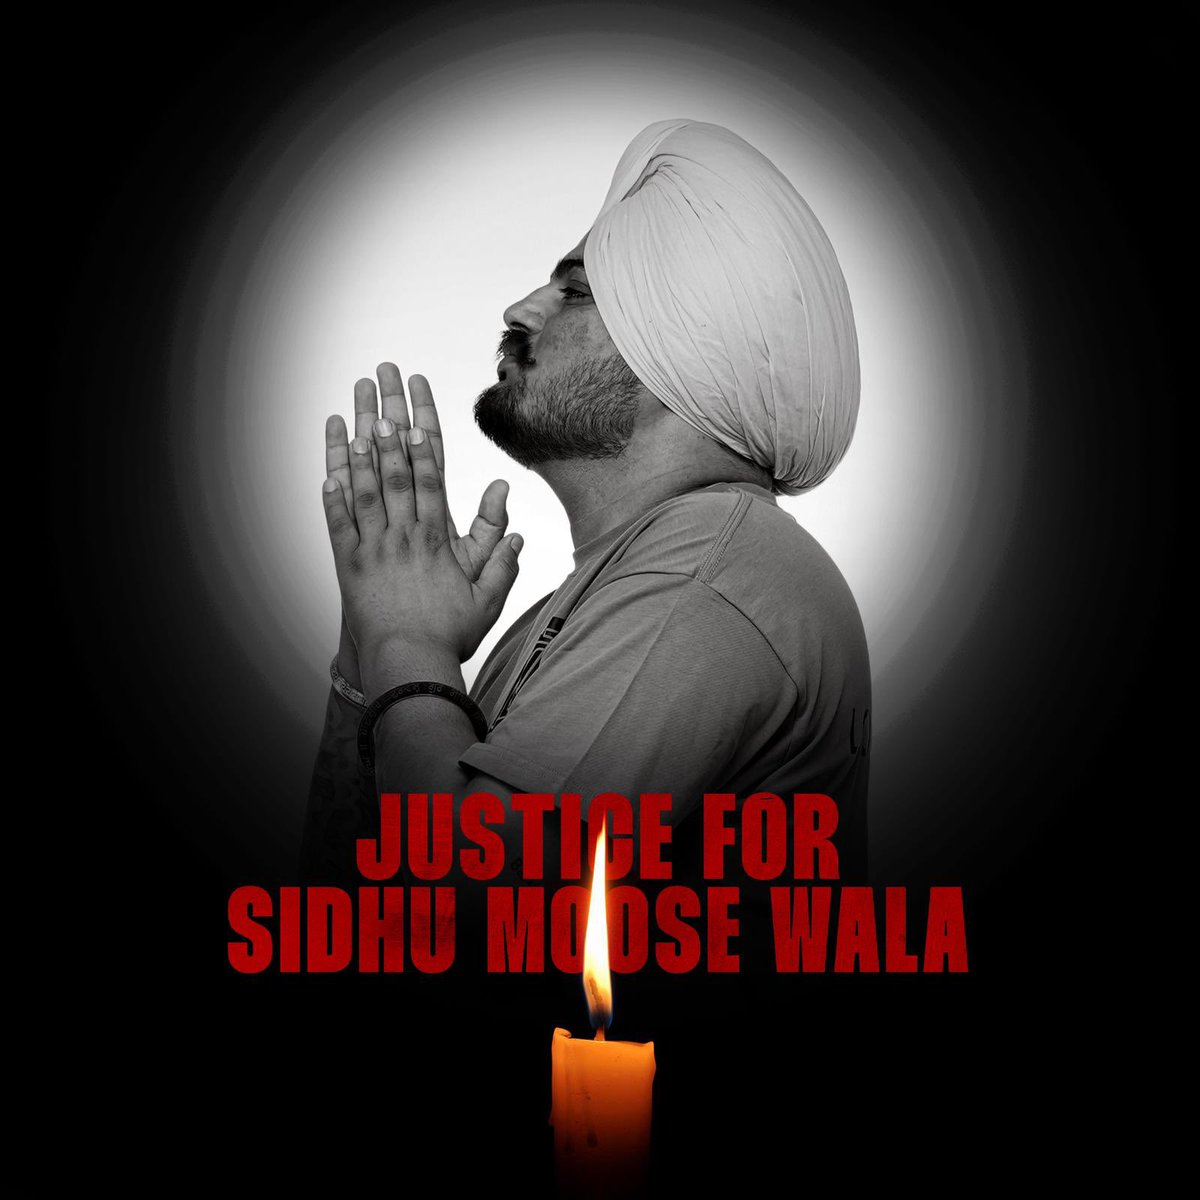 If you are unable to be a part of the March, kindly upload the above post on your social media accounts (Facebook, Instagram, Twitter) with a caption that includes #JusticeForSidhuMooseWala